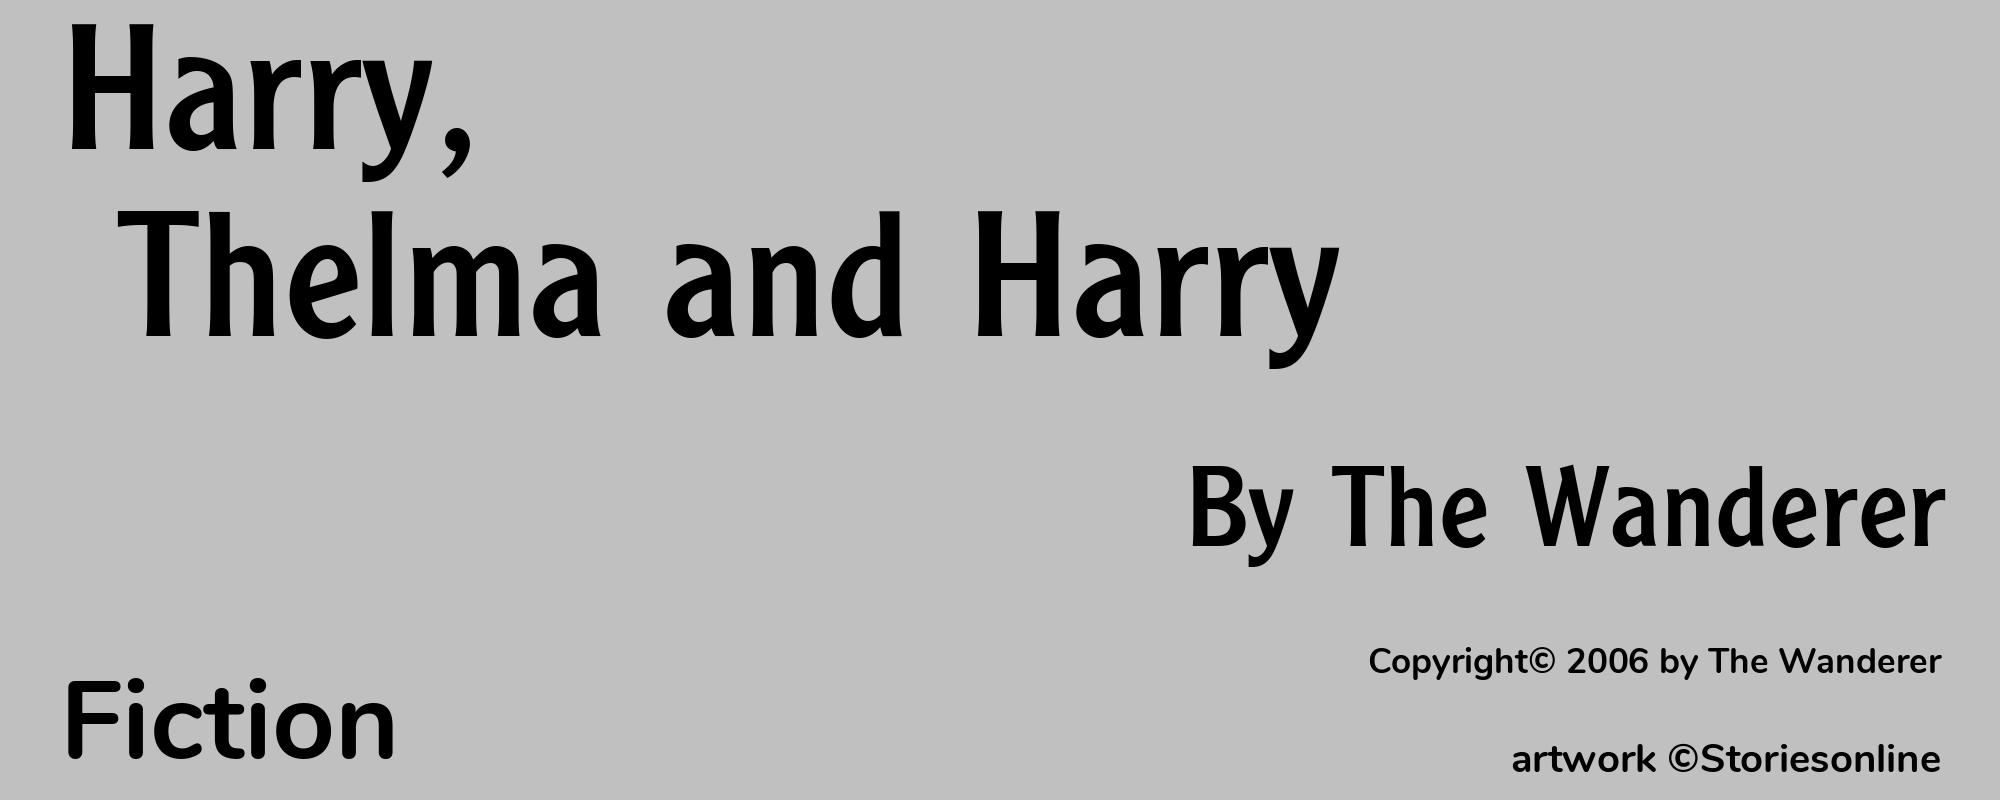 Harry, Thelma and Harry - Cover